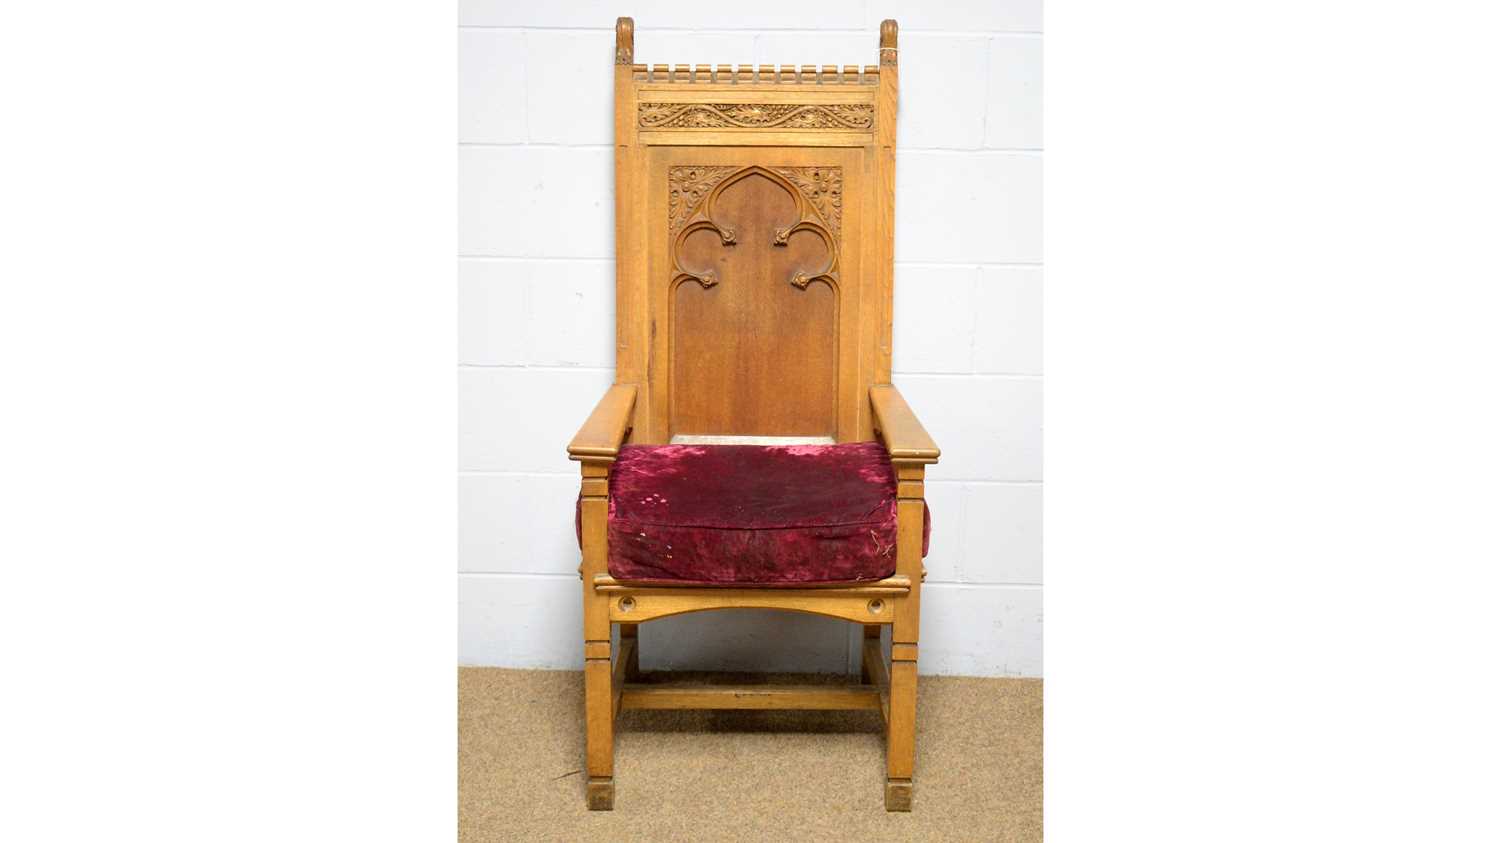 Lot 66 - A substantial Victorian-style carved oak ceremonial armchair.